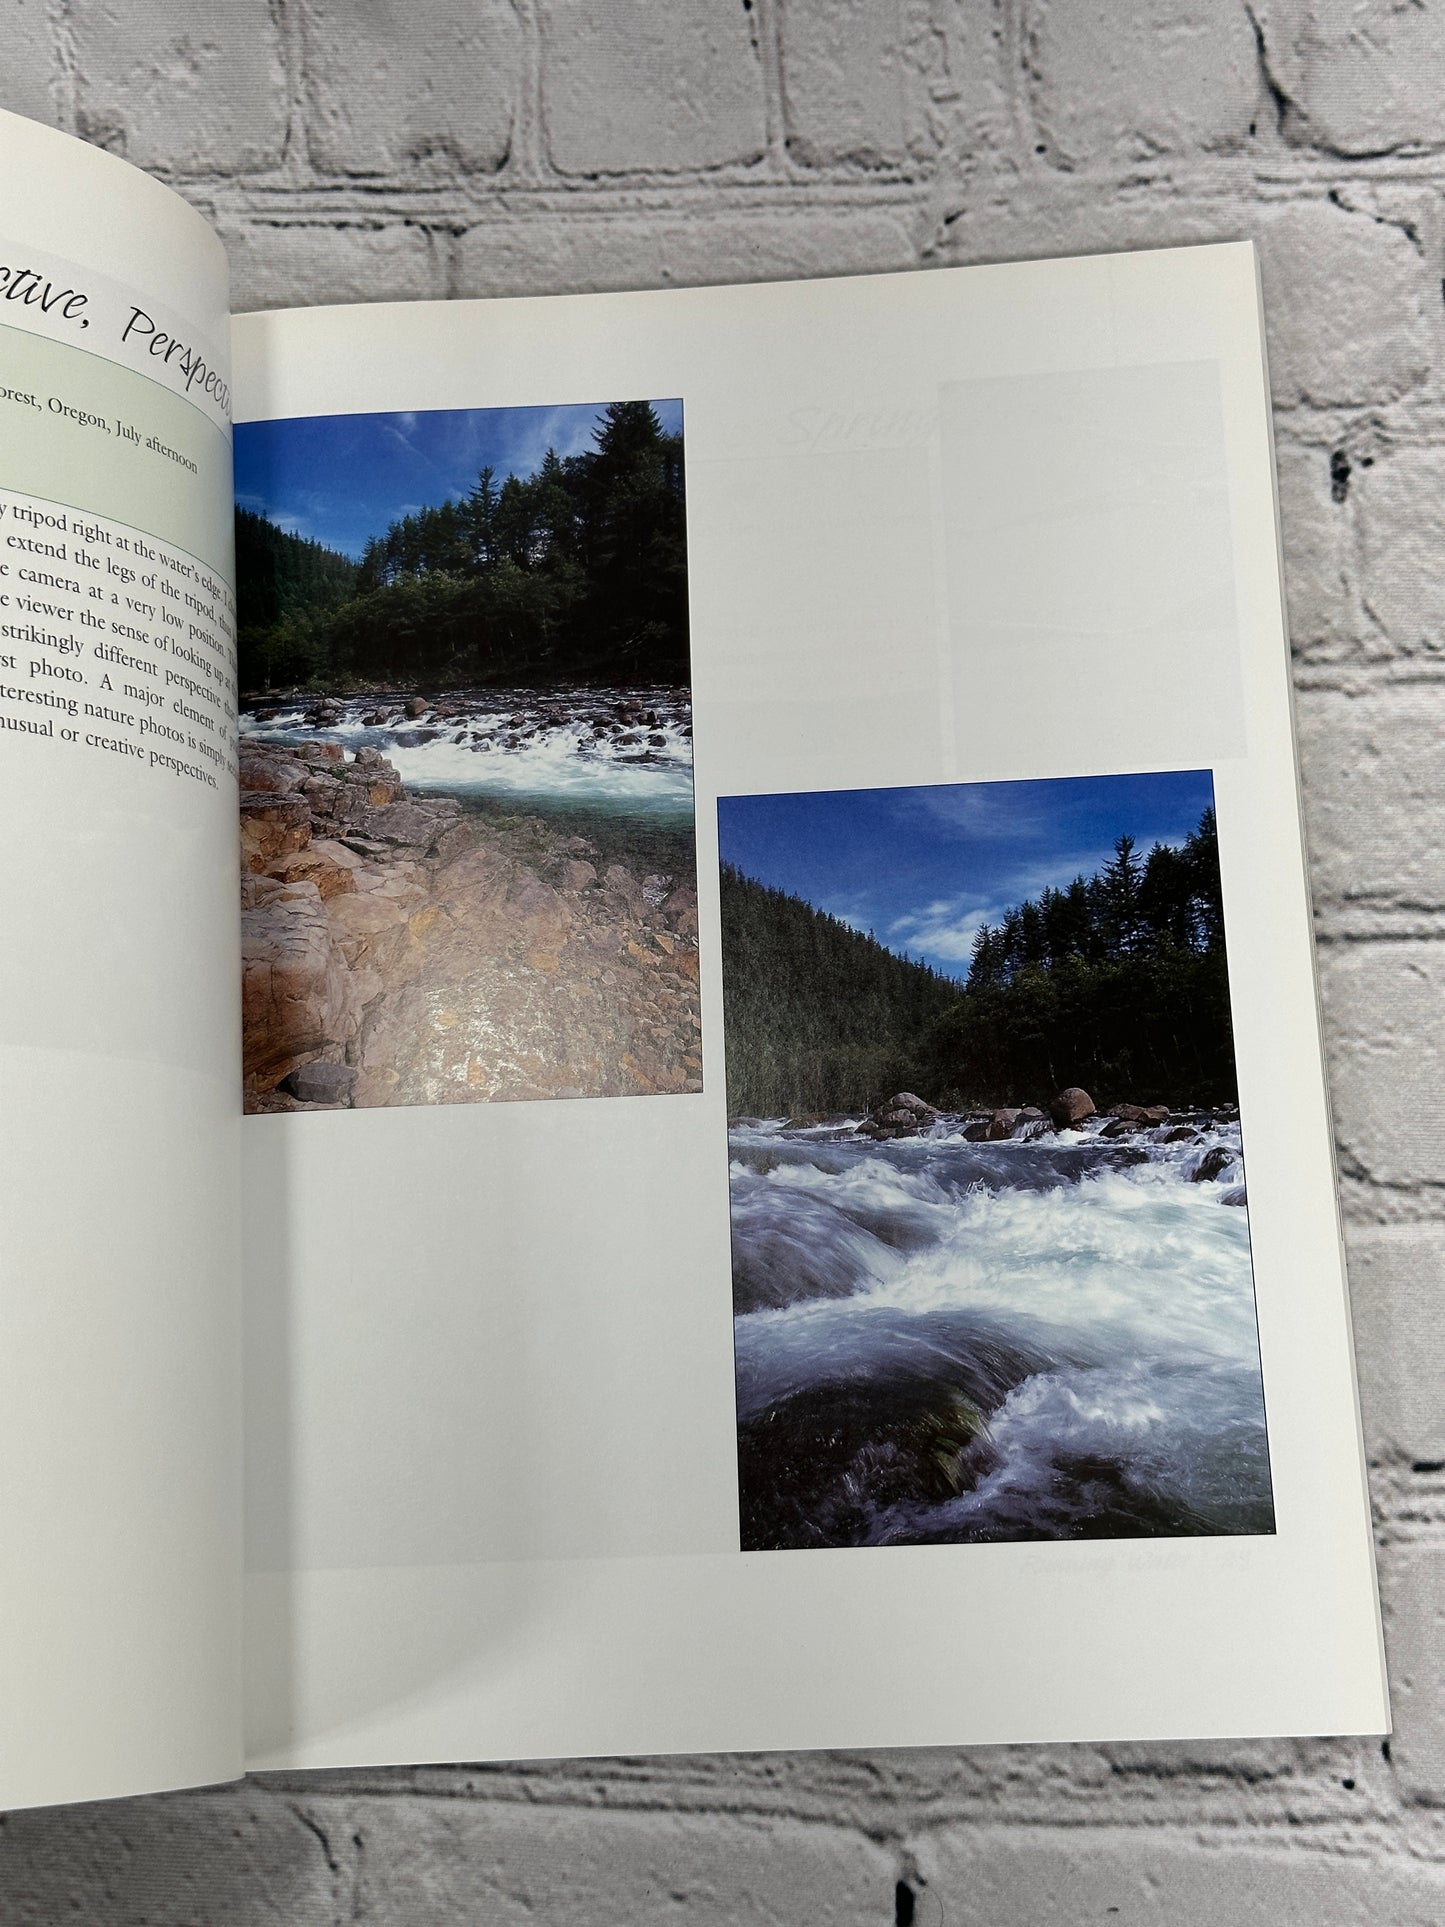 The Art of Photographing Water: Rivers, Lakes, Waterfa... by Cub Kahn [2002]